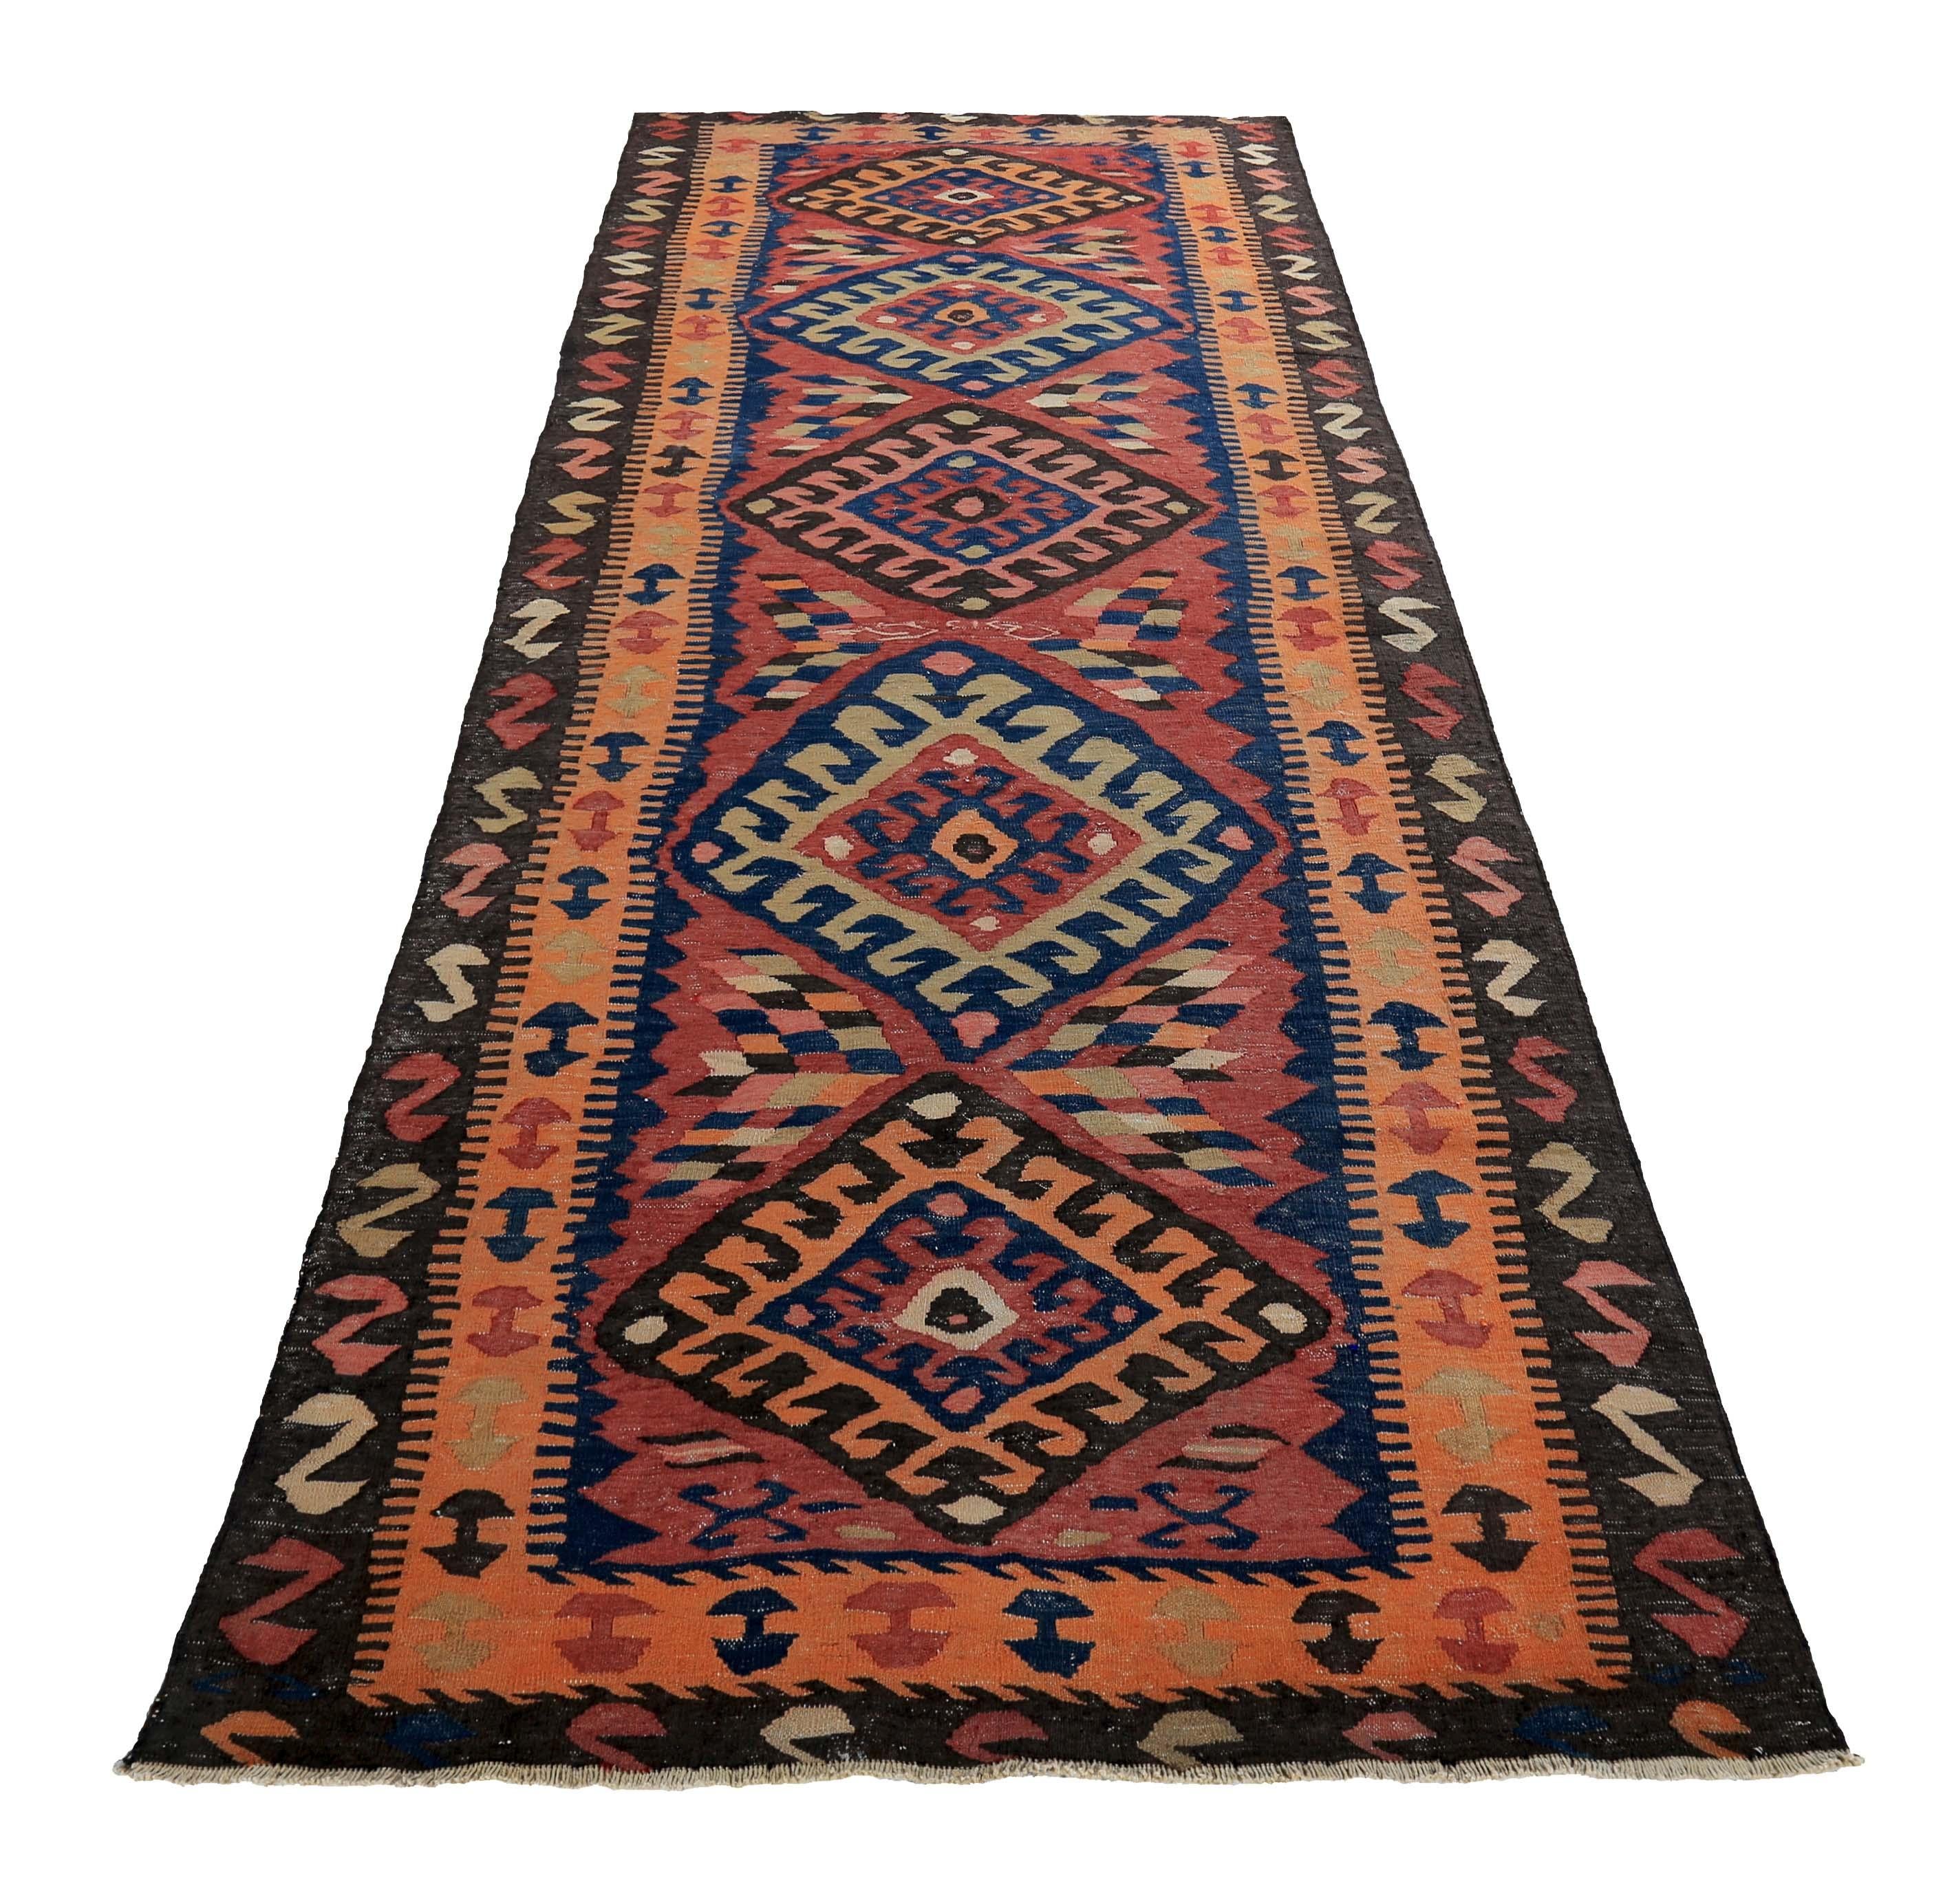 Turkish runner rug handwoven from the finest sheep’s wool and colored with all-natural vegetable dyes that are safe for humans and pets. It’s a traditional Kilim flat-weave design featuring red, blue, and orange tribal details. It’s a stunning piece